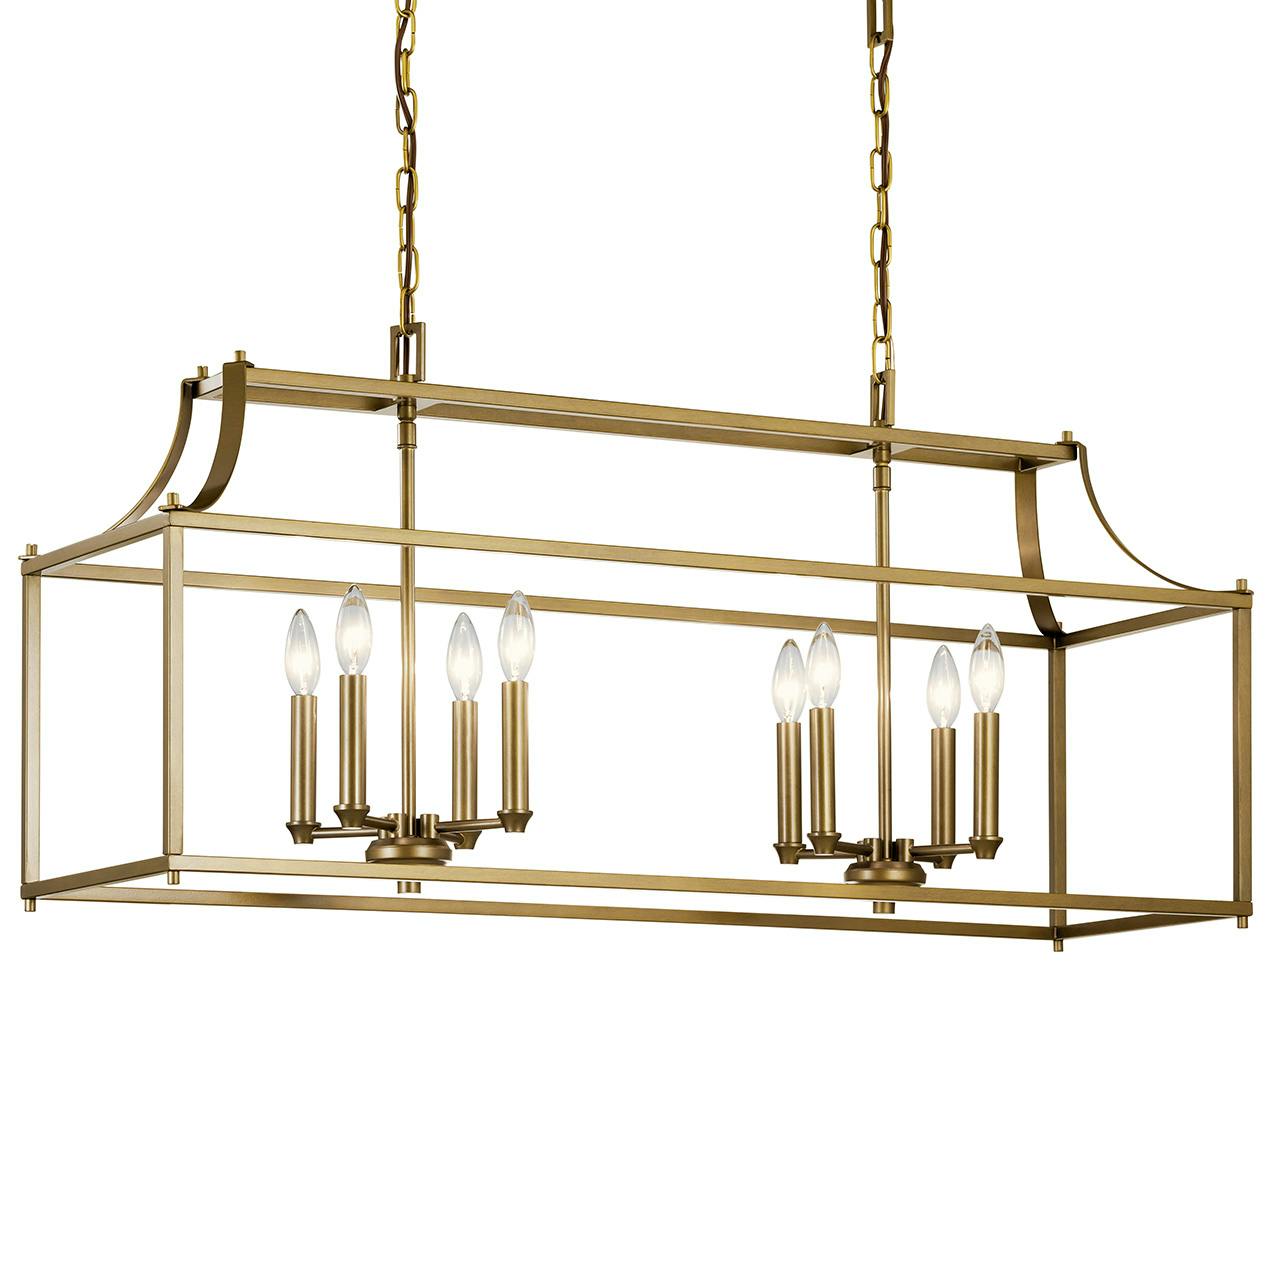 Morrigan 8 Light Linear Chandelier Brass without the canopy on a white background